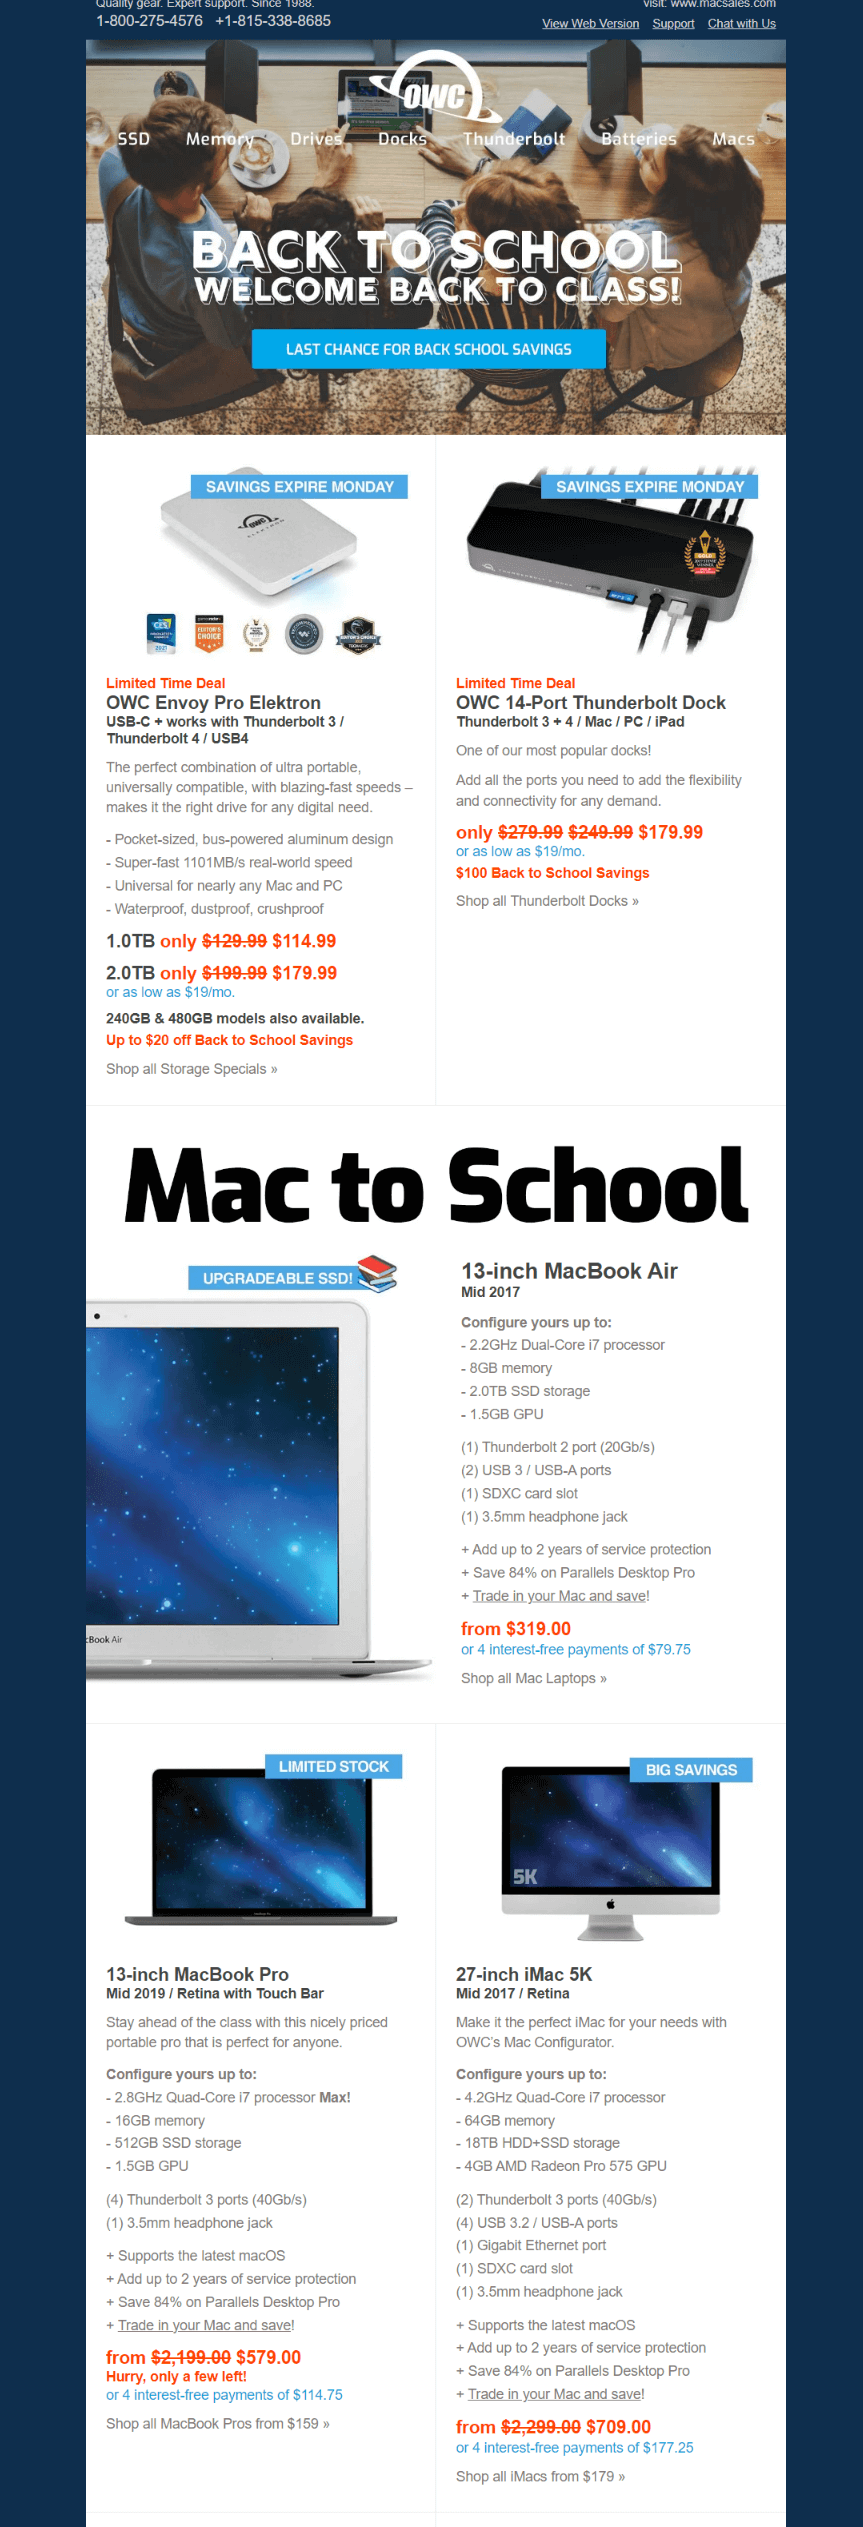 Back to school email from Mac Sales that offers discounts on Apple computers with a sense of urgency created with a subject line, prices highlighted in red, and phrases “hurry, only a few left!” and “last chance for back to school savings”